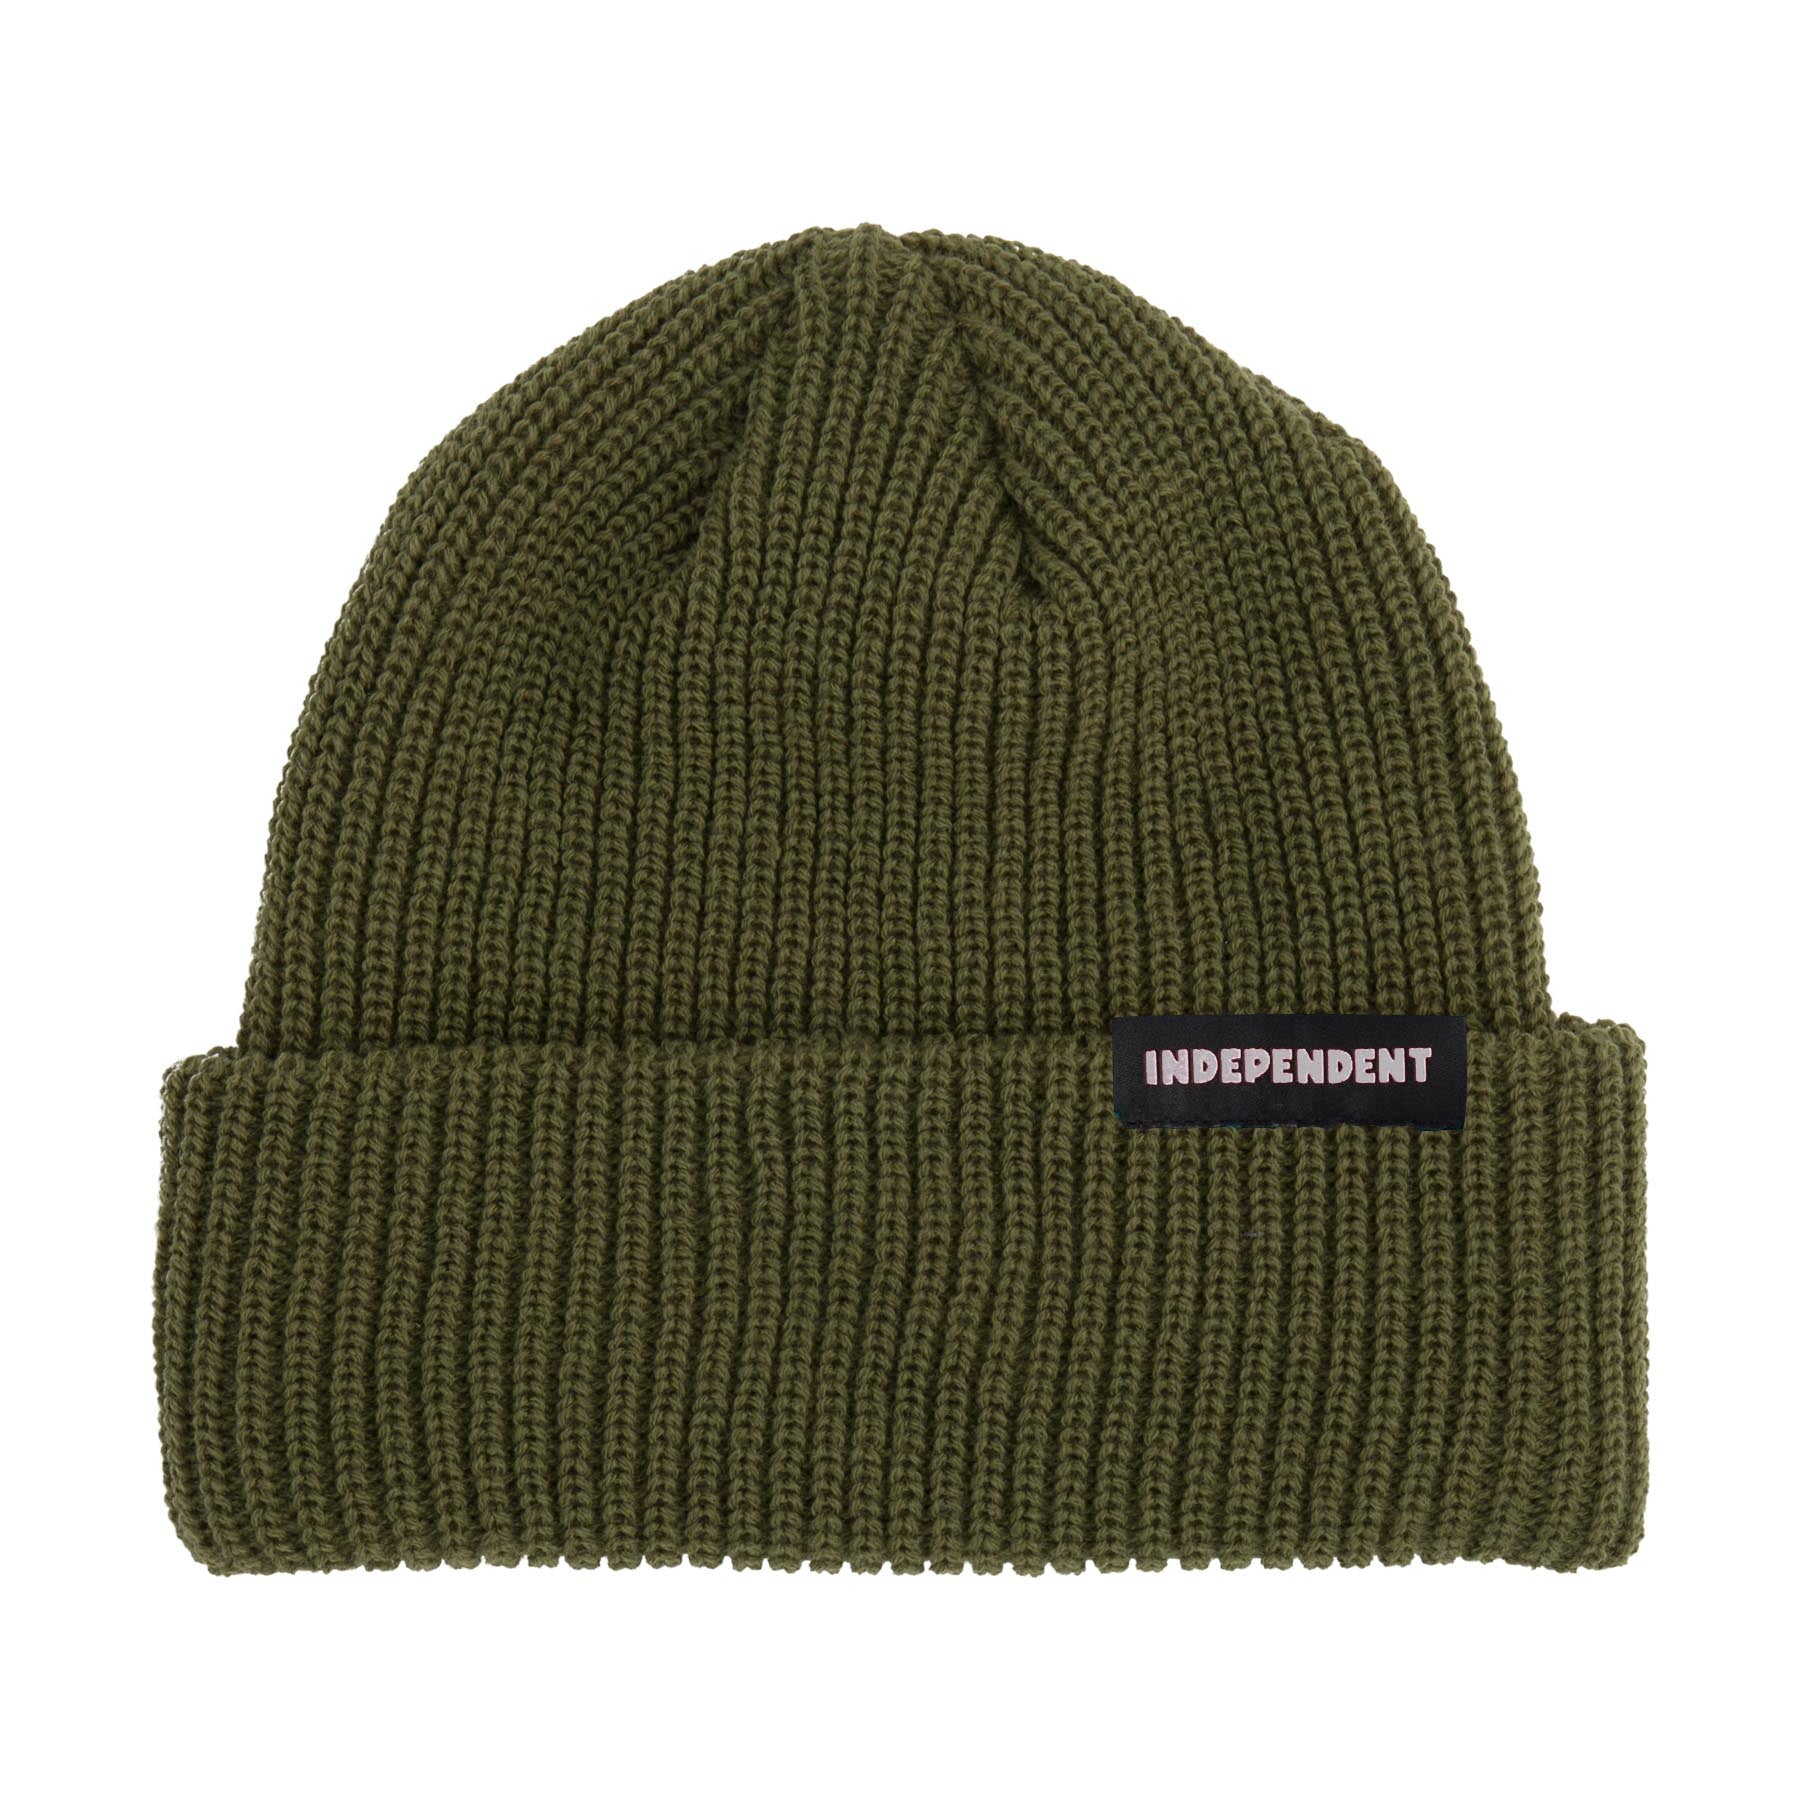 Independent Beacon Beanie - Olive